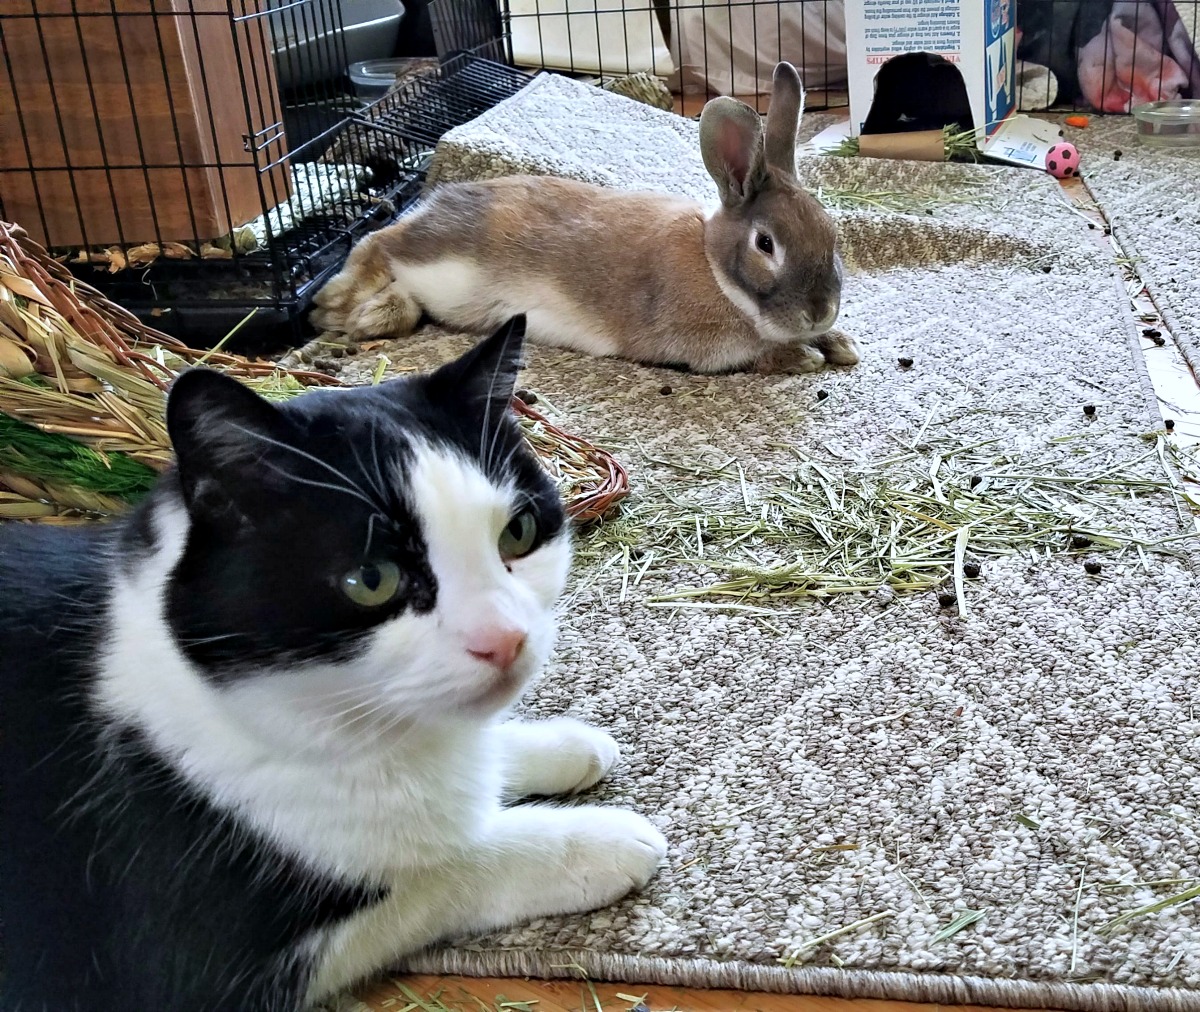 introducing rabbit to cats, rescue rabbit